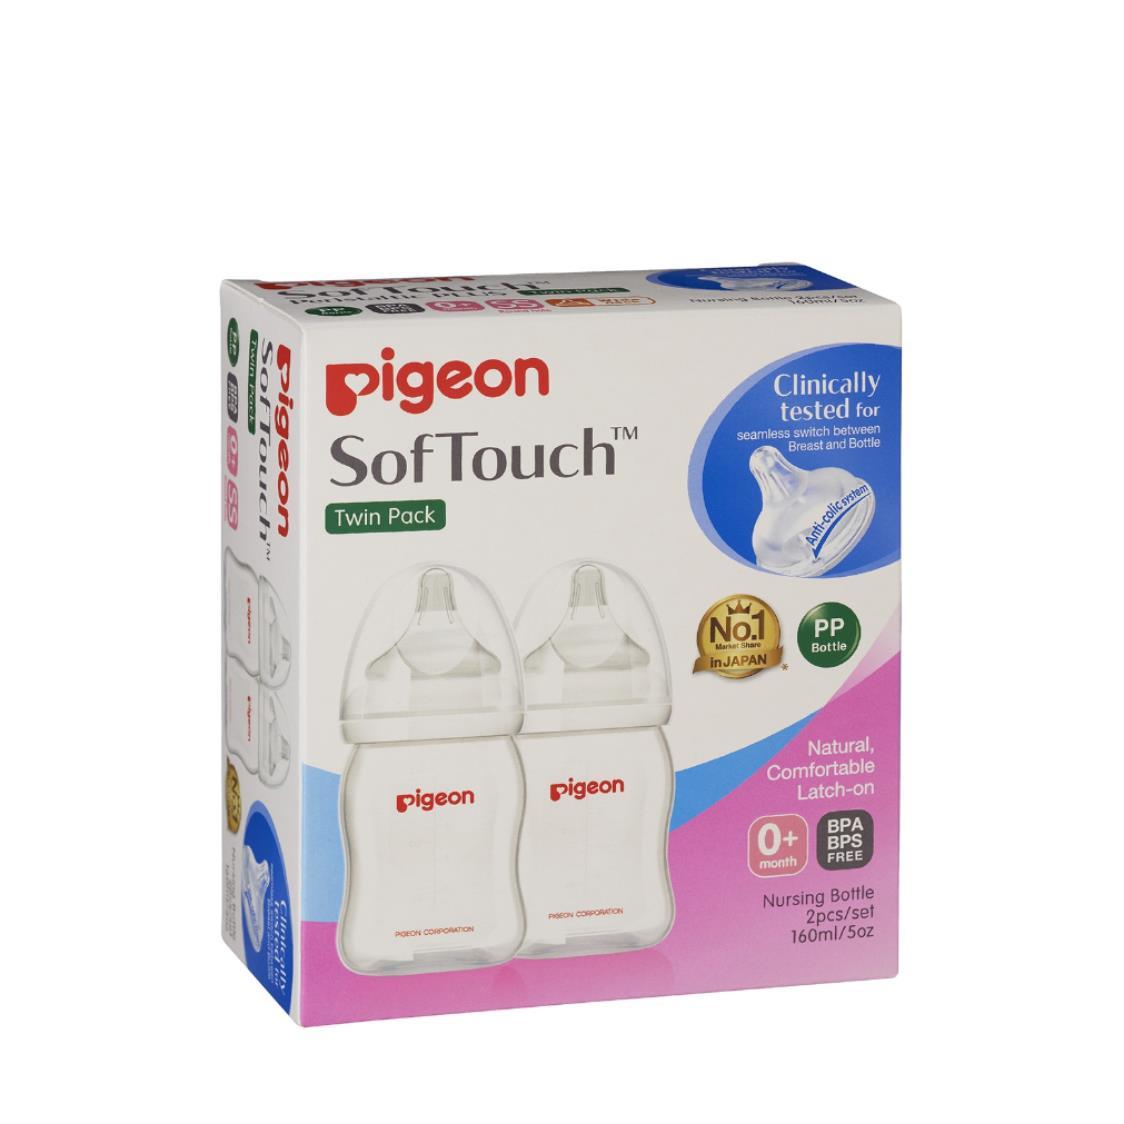 Pigeon Softouch Tm Peristaltic Plus Twin Pack Wn Pp Ss Size